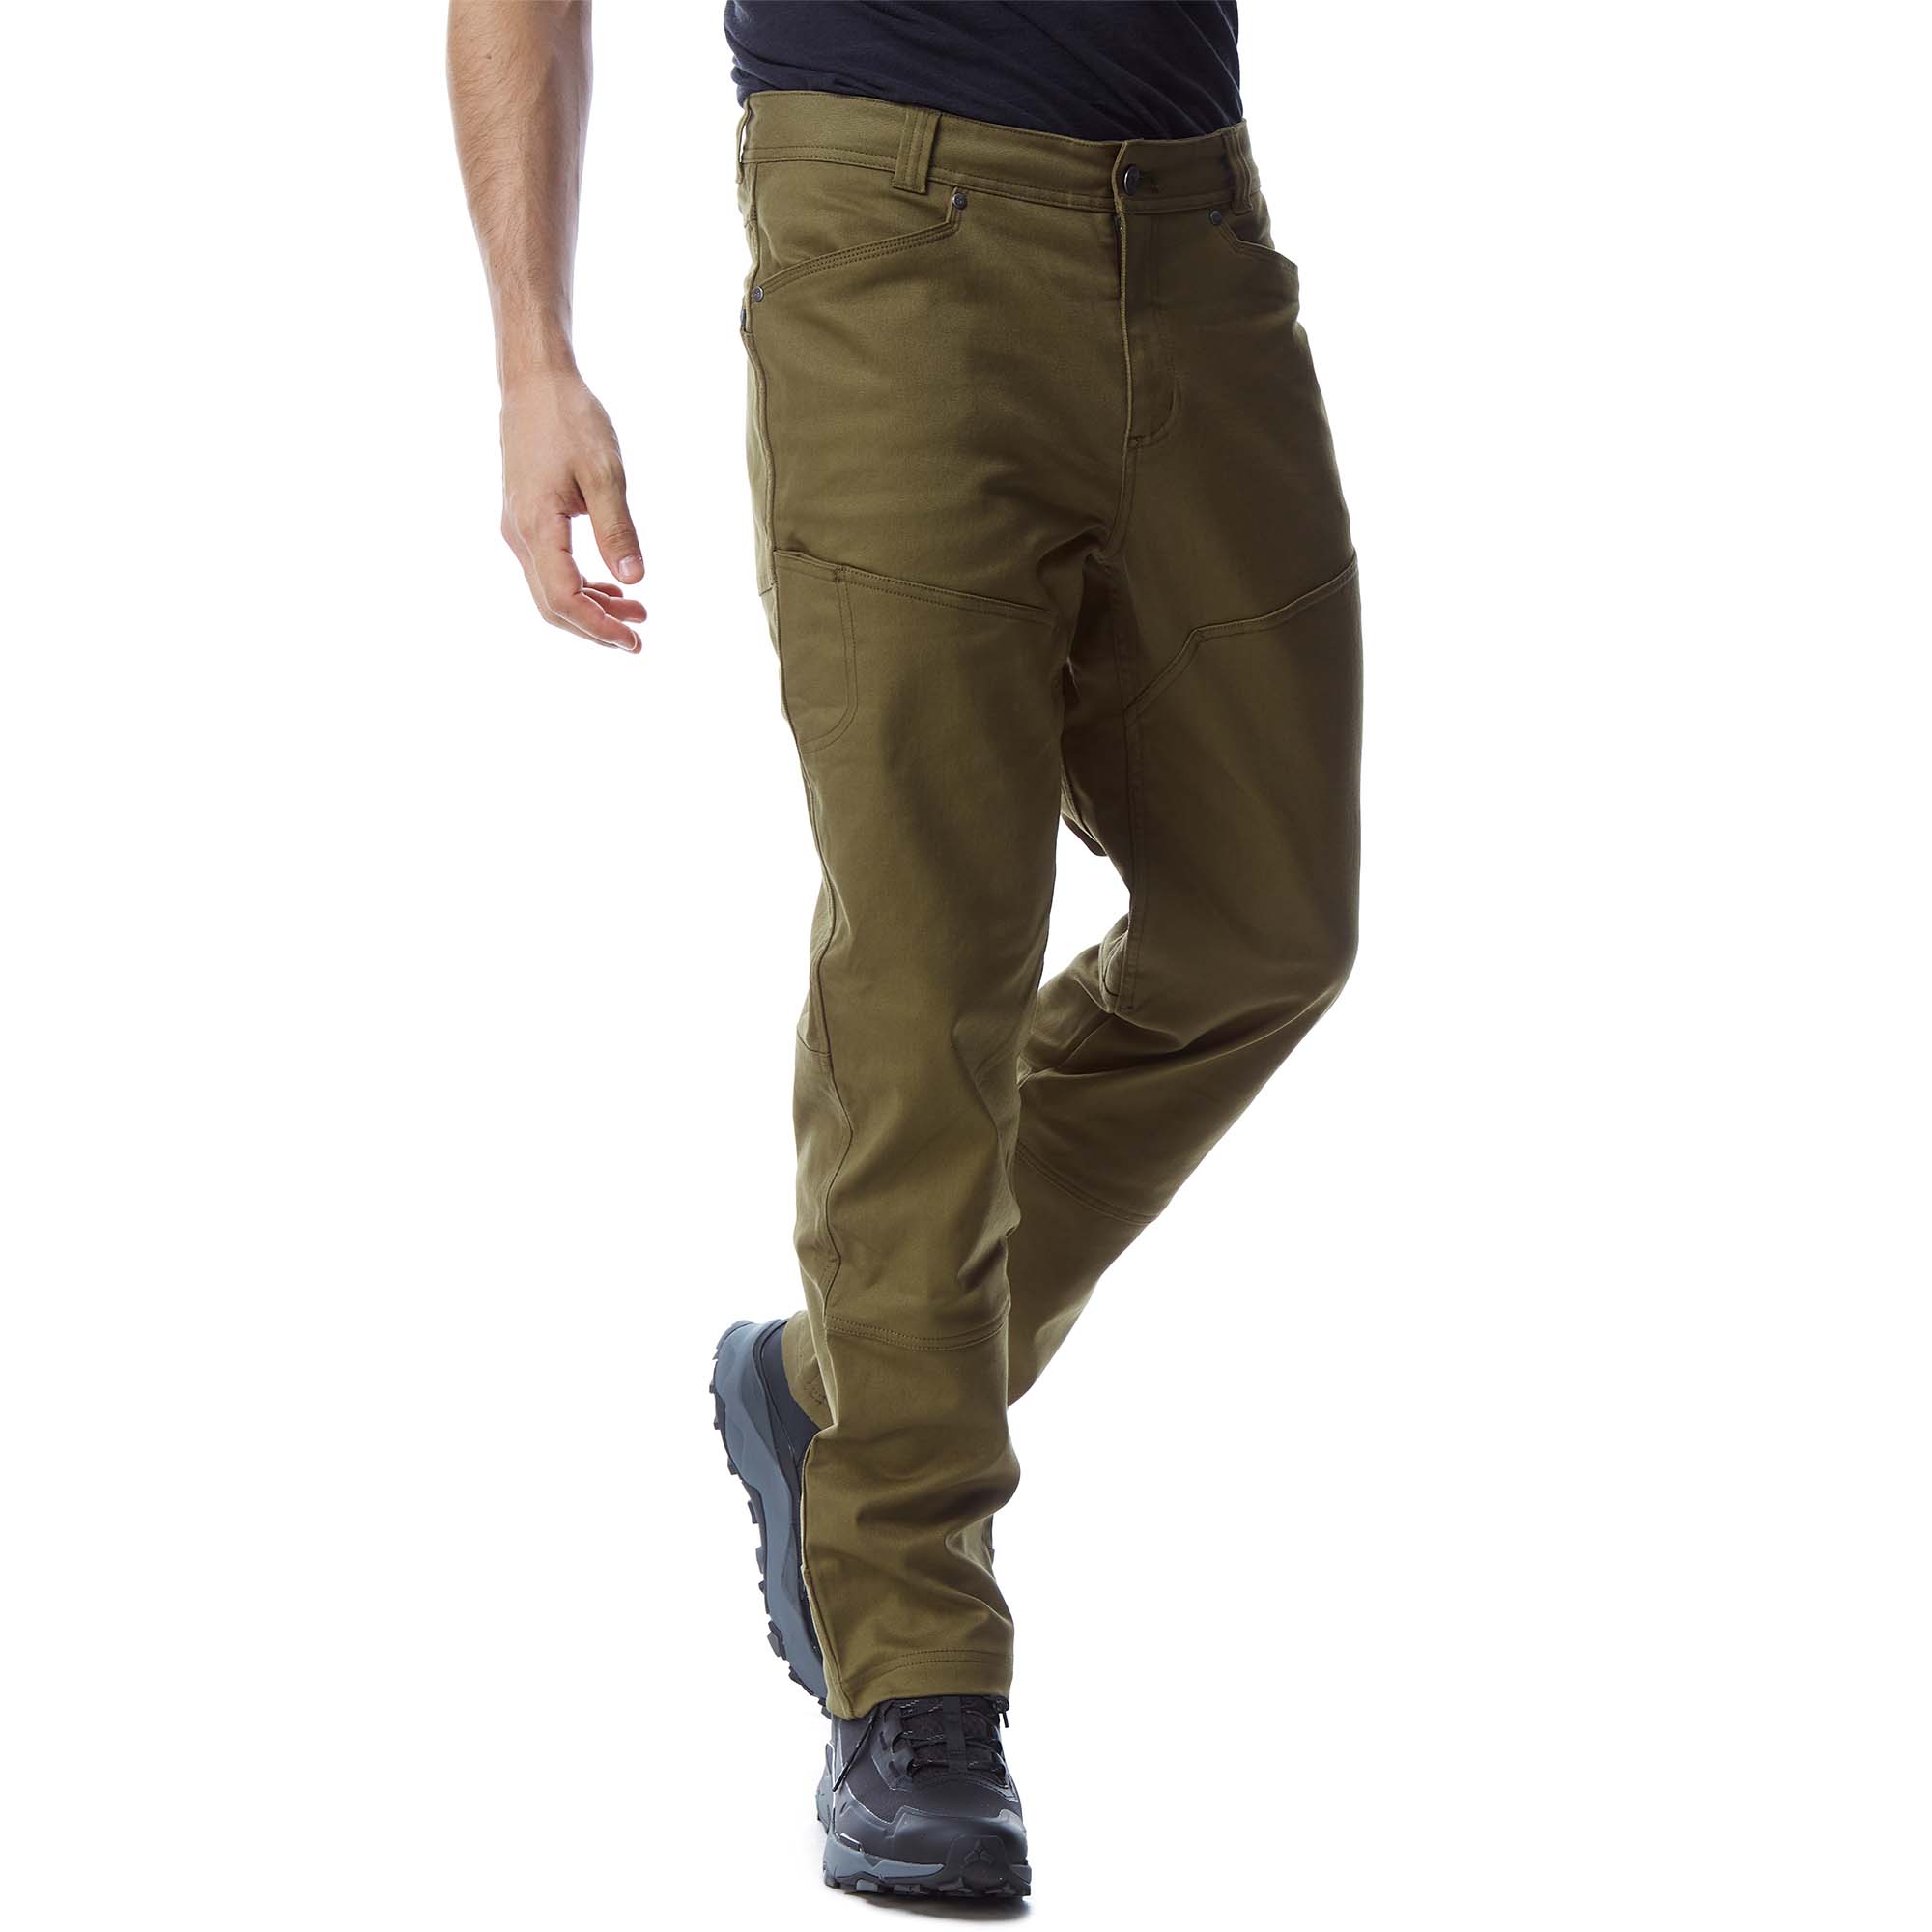 Outdoor Research Lined Work Pants Hiking Trousers 